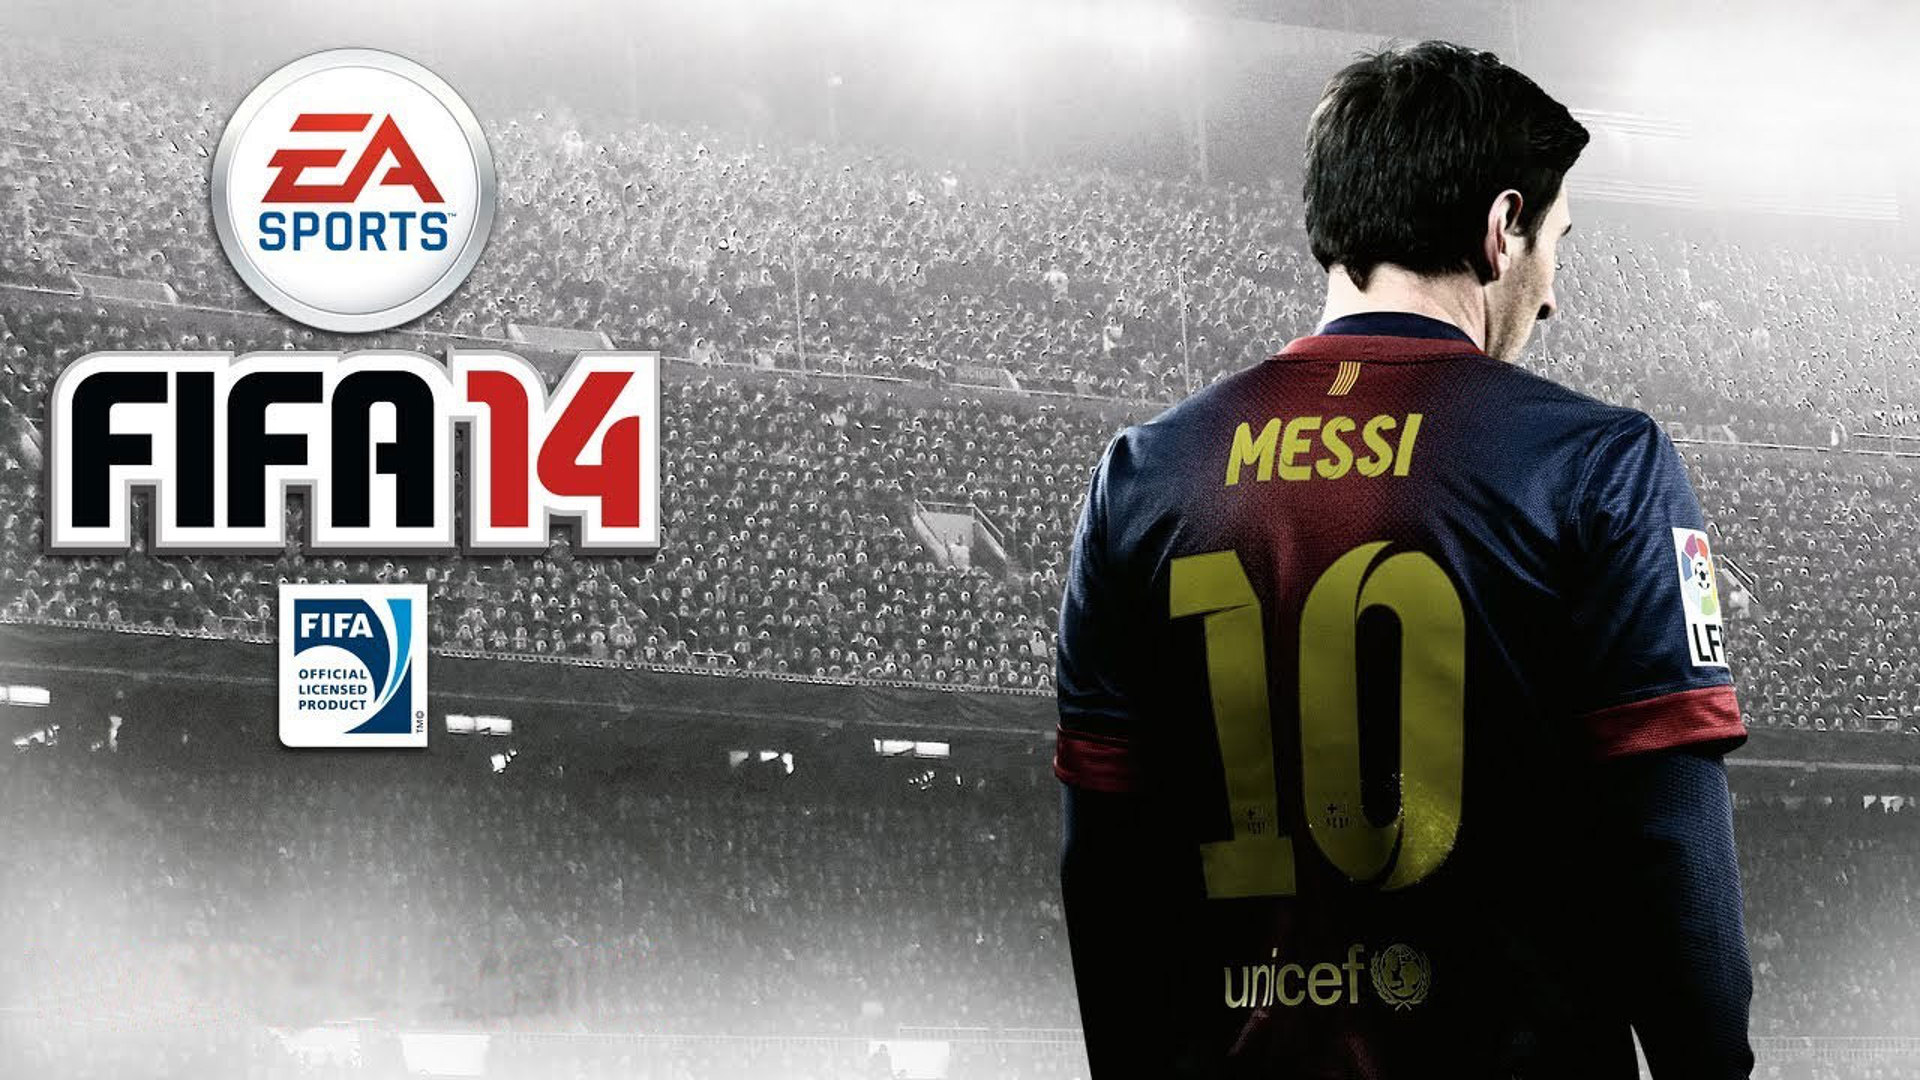 FIFA 14 Wallpapers